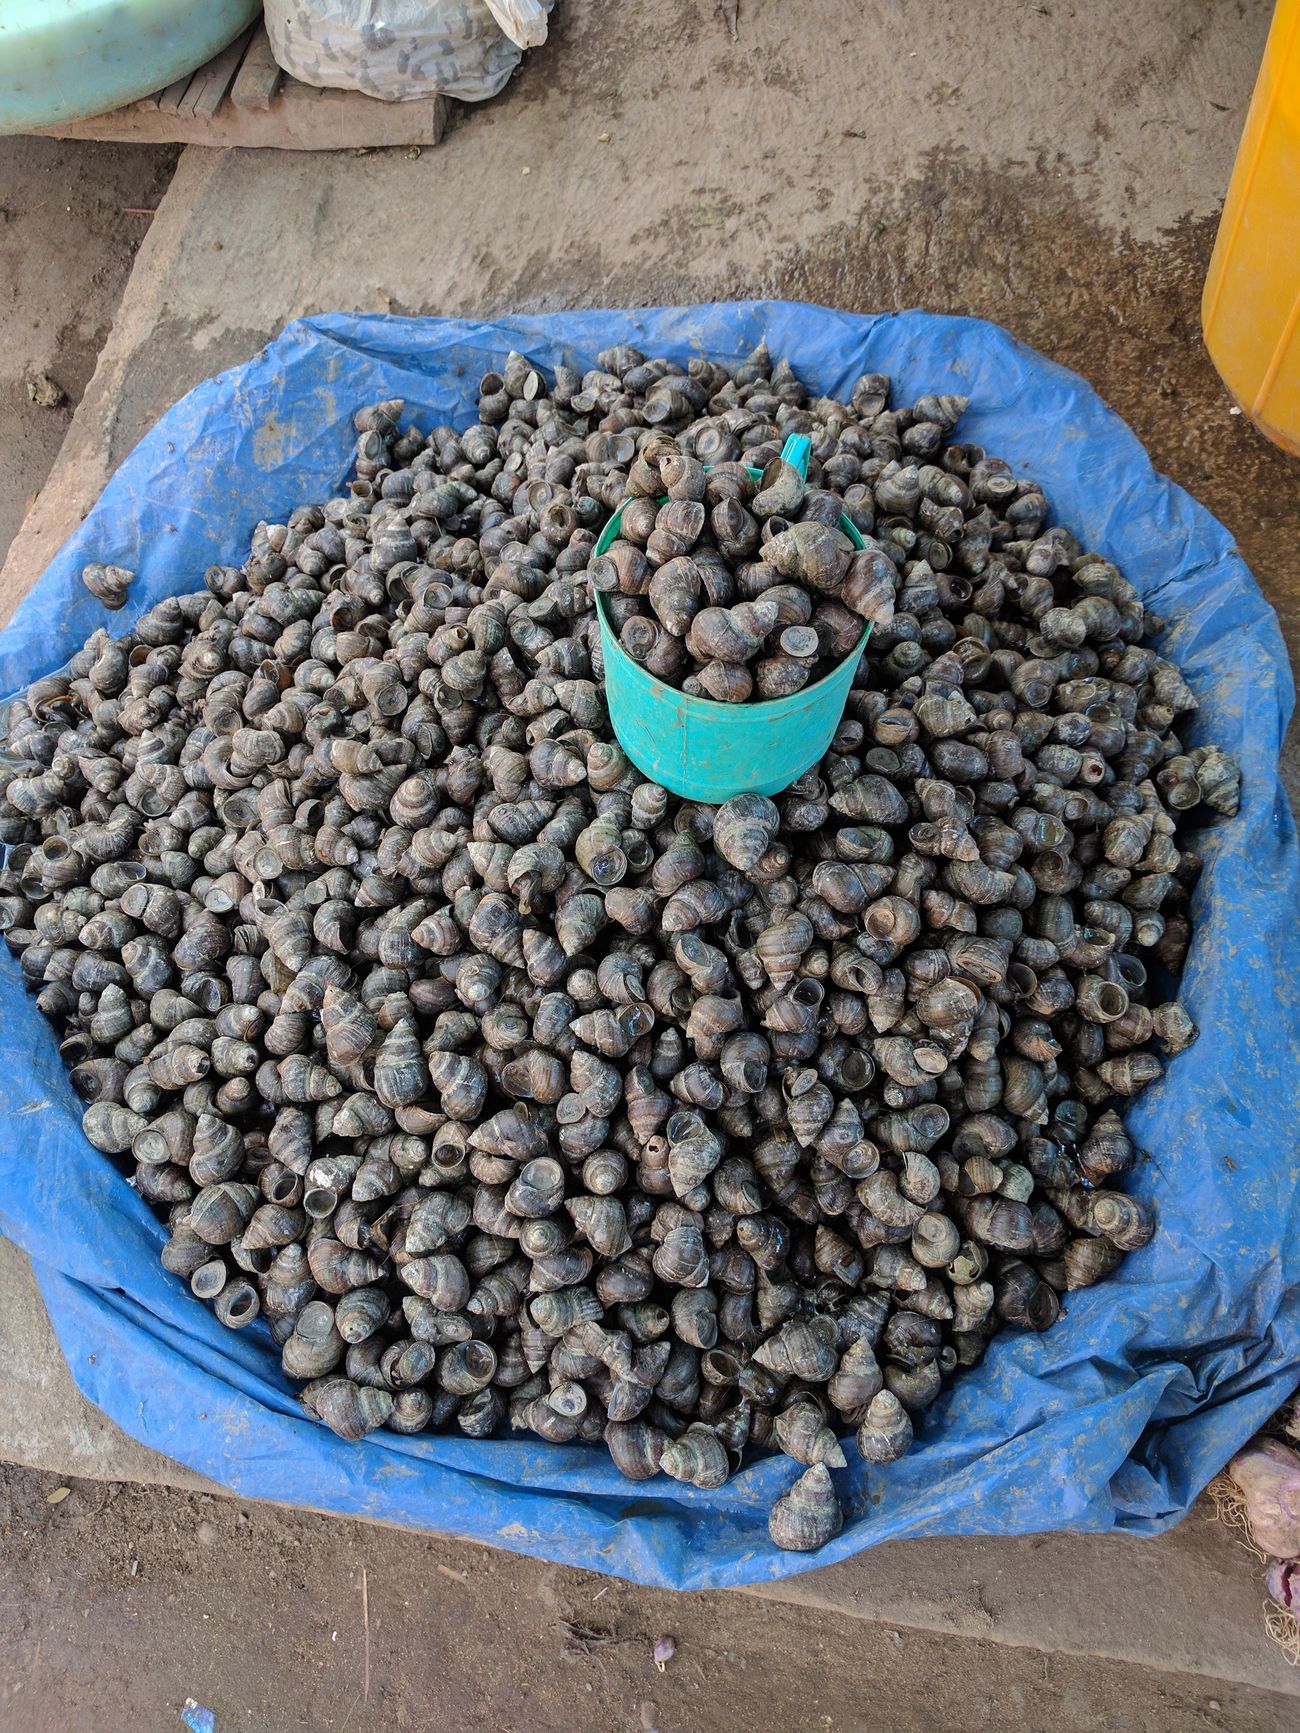 A pile of snails for sale in the Bara Bazar in Aizawl, which offers many delicacies unique to the state